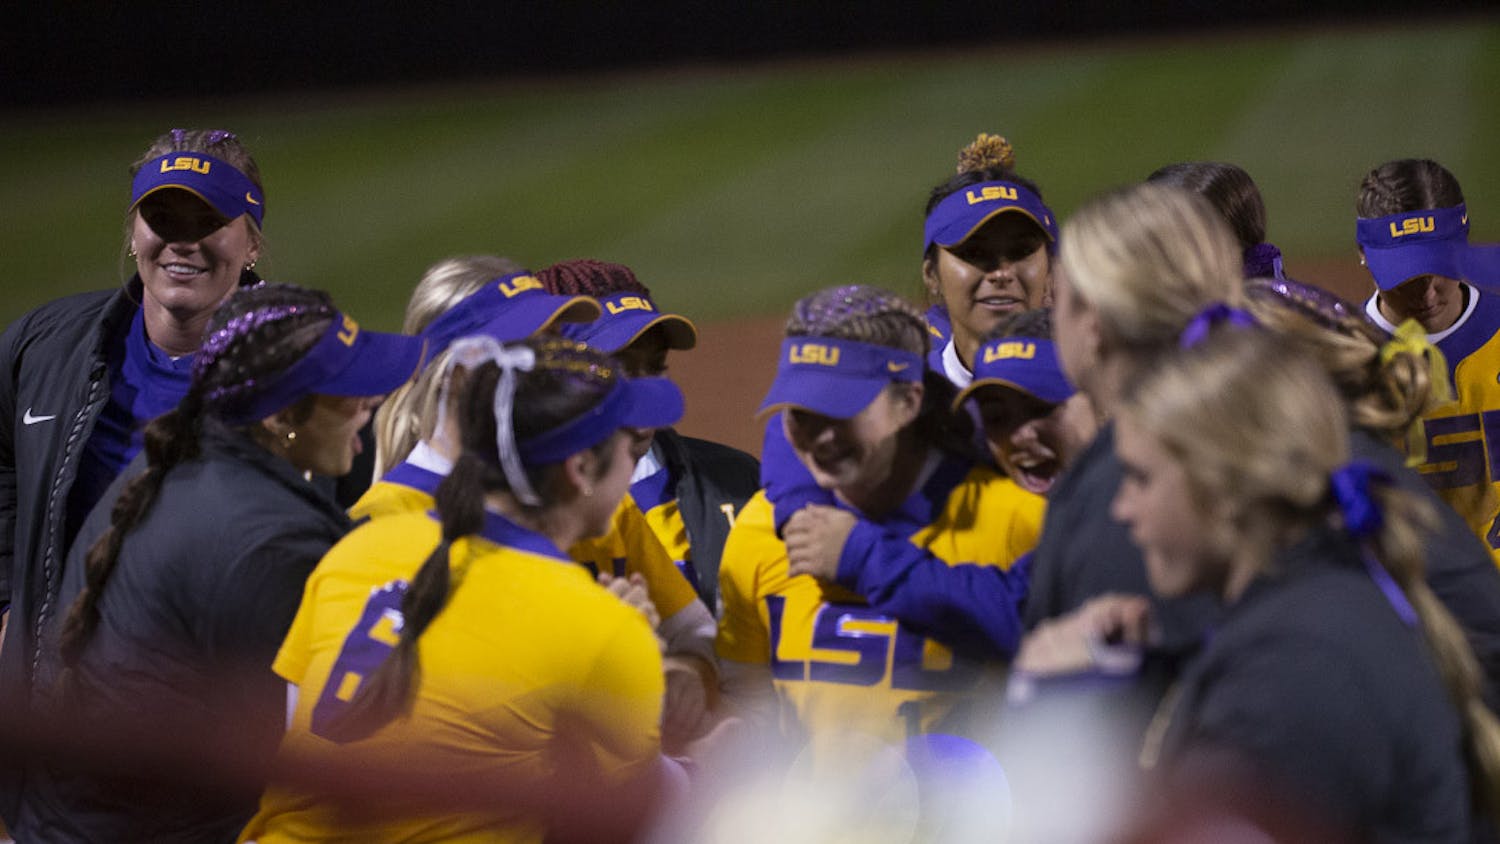 LSU celebrates after freshman catcher Maci Bergeron makes a double play against South Carolina's offense during the second match of the doubleheader at Beckham Field on March 13, 2023. The Tigers beat the Gamecocks 5-1.